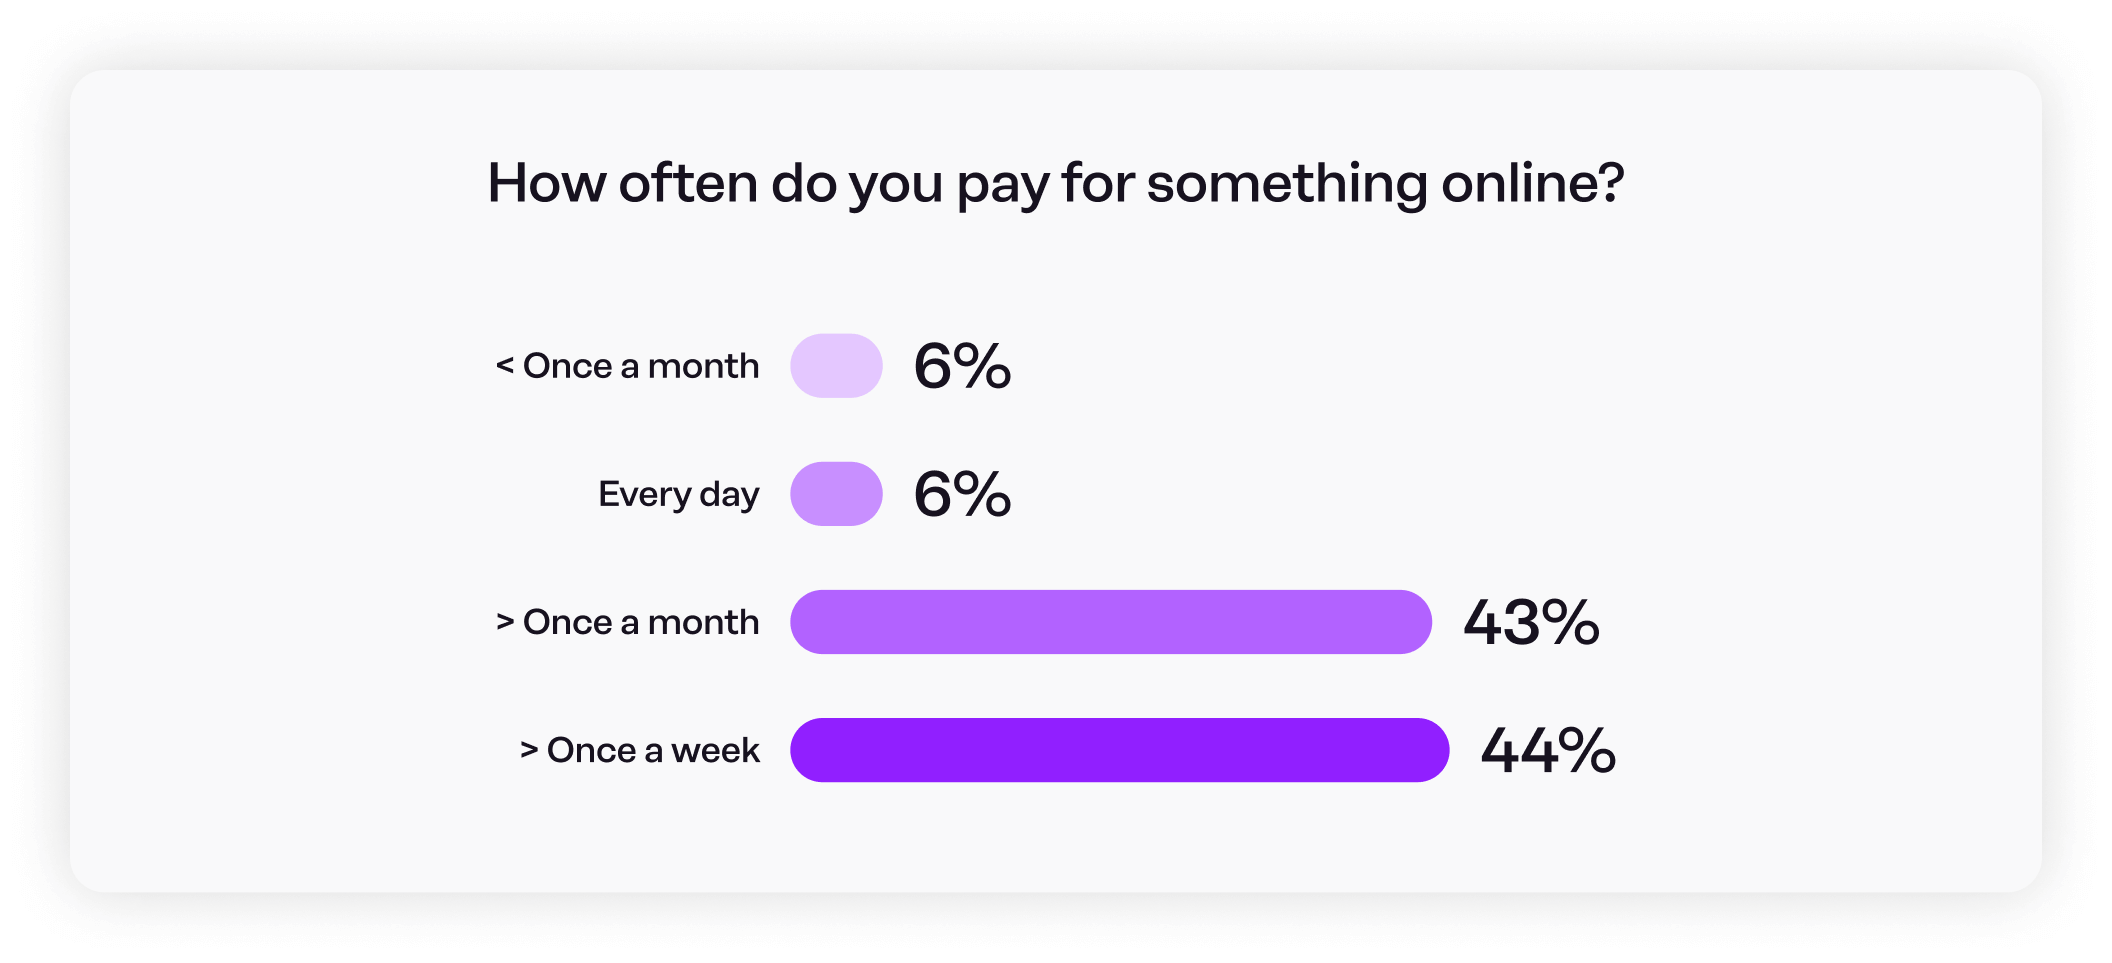 How often do you pay for something online?